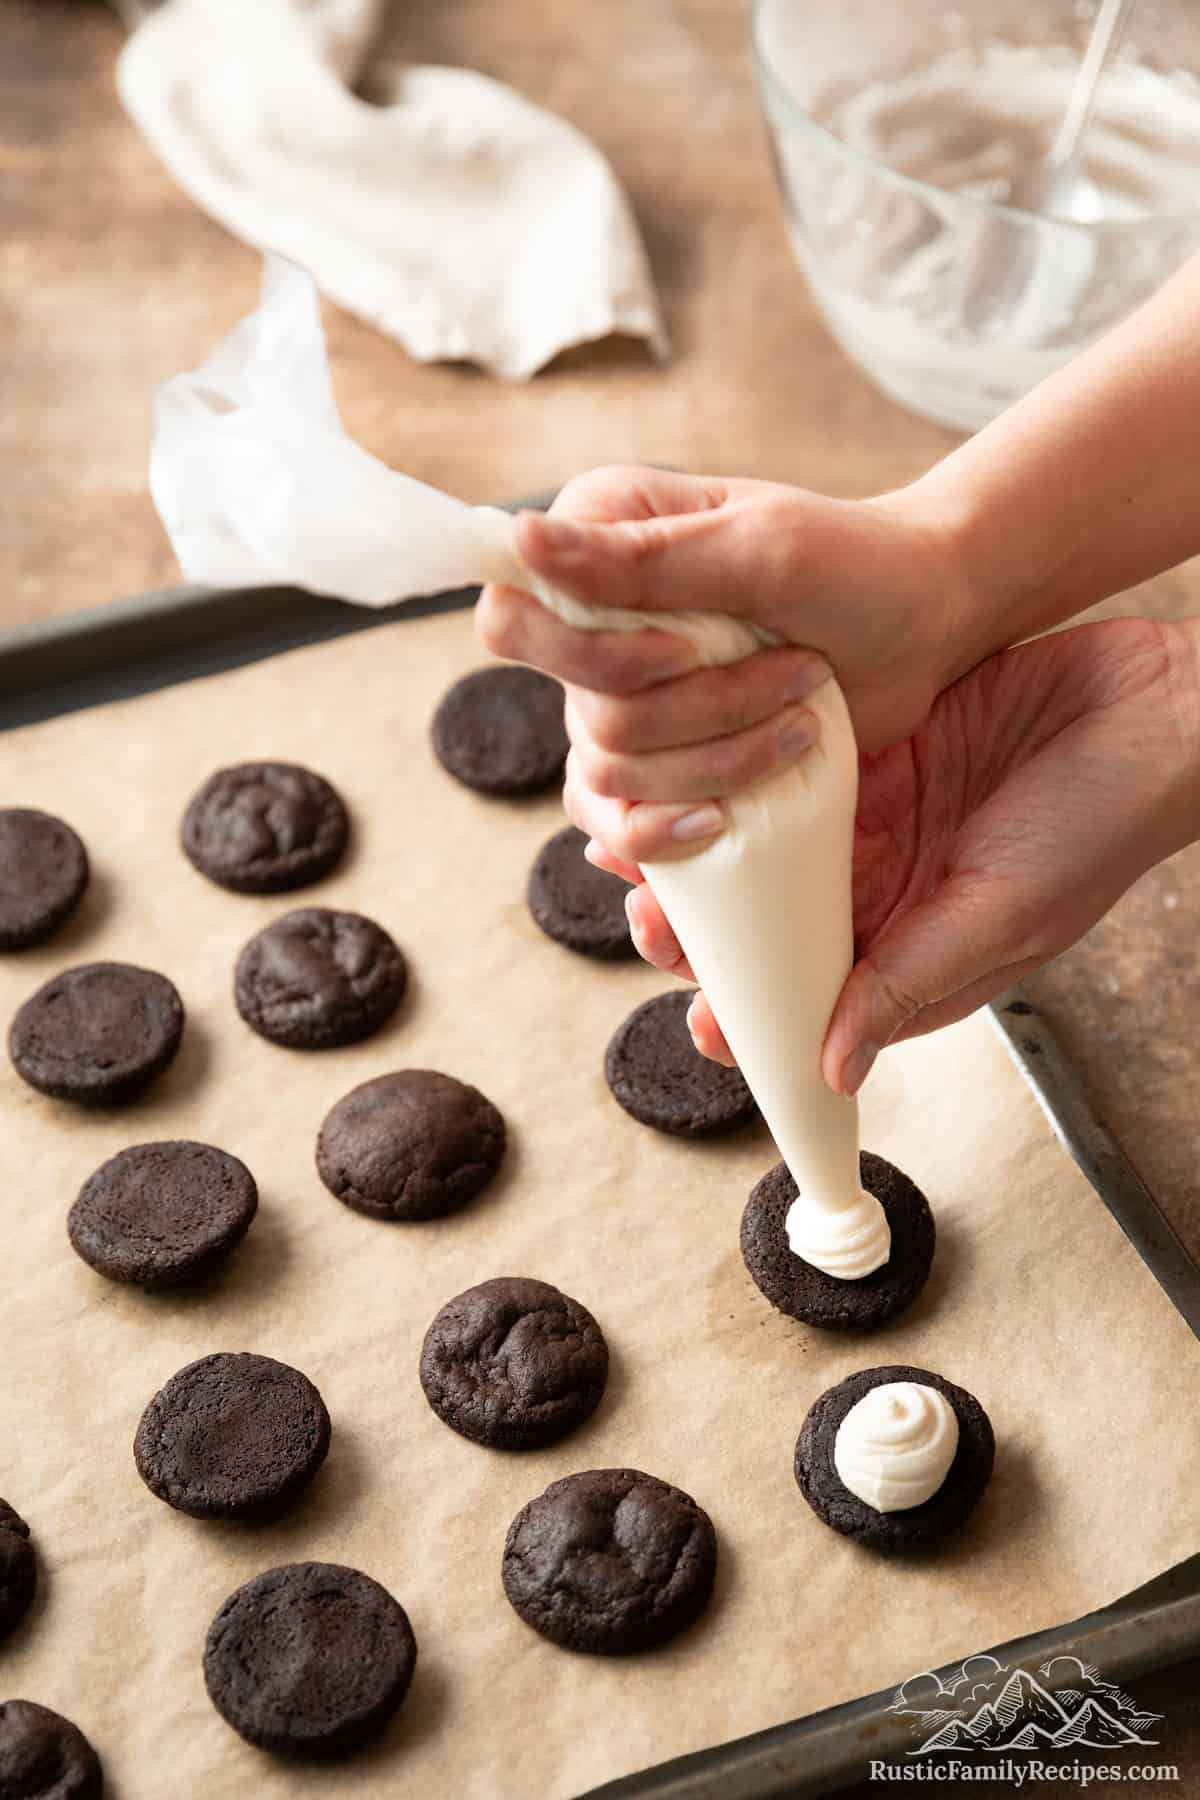 Hands use a piping bag to pipe vanilla filling onto chocolate cookie halves on a baking sheet.